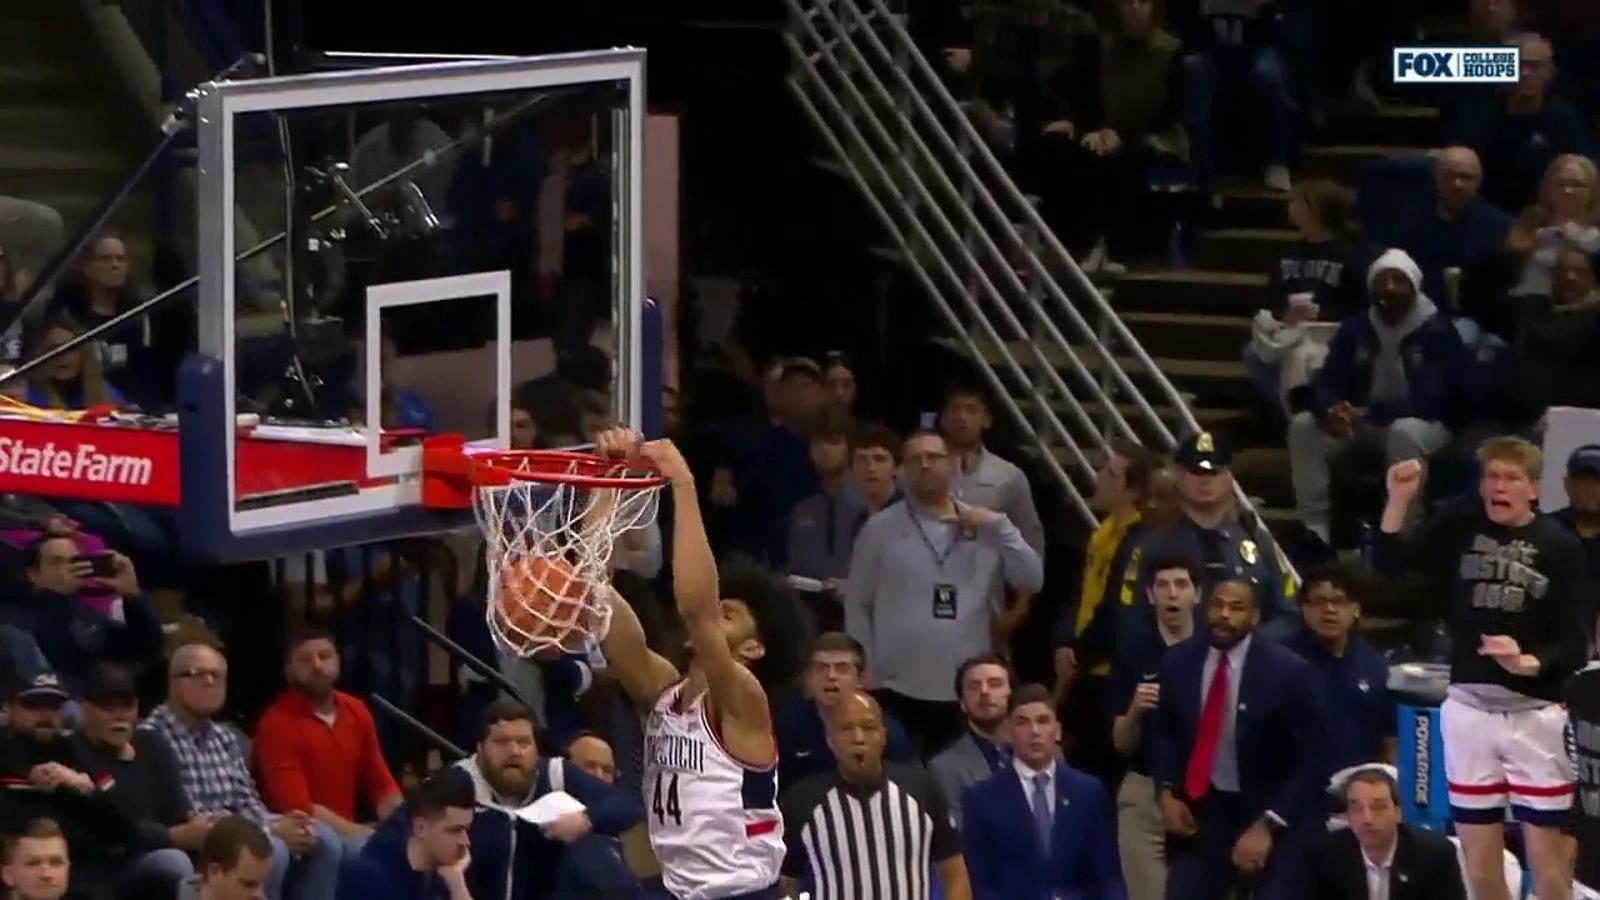 Andre Jackson Jr. takes flight to throw down a two-handed jam to extend UConn's lead over Seton Hall